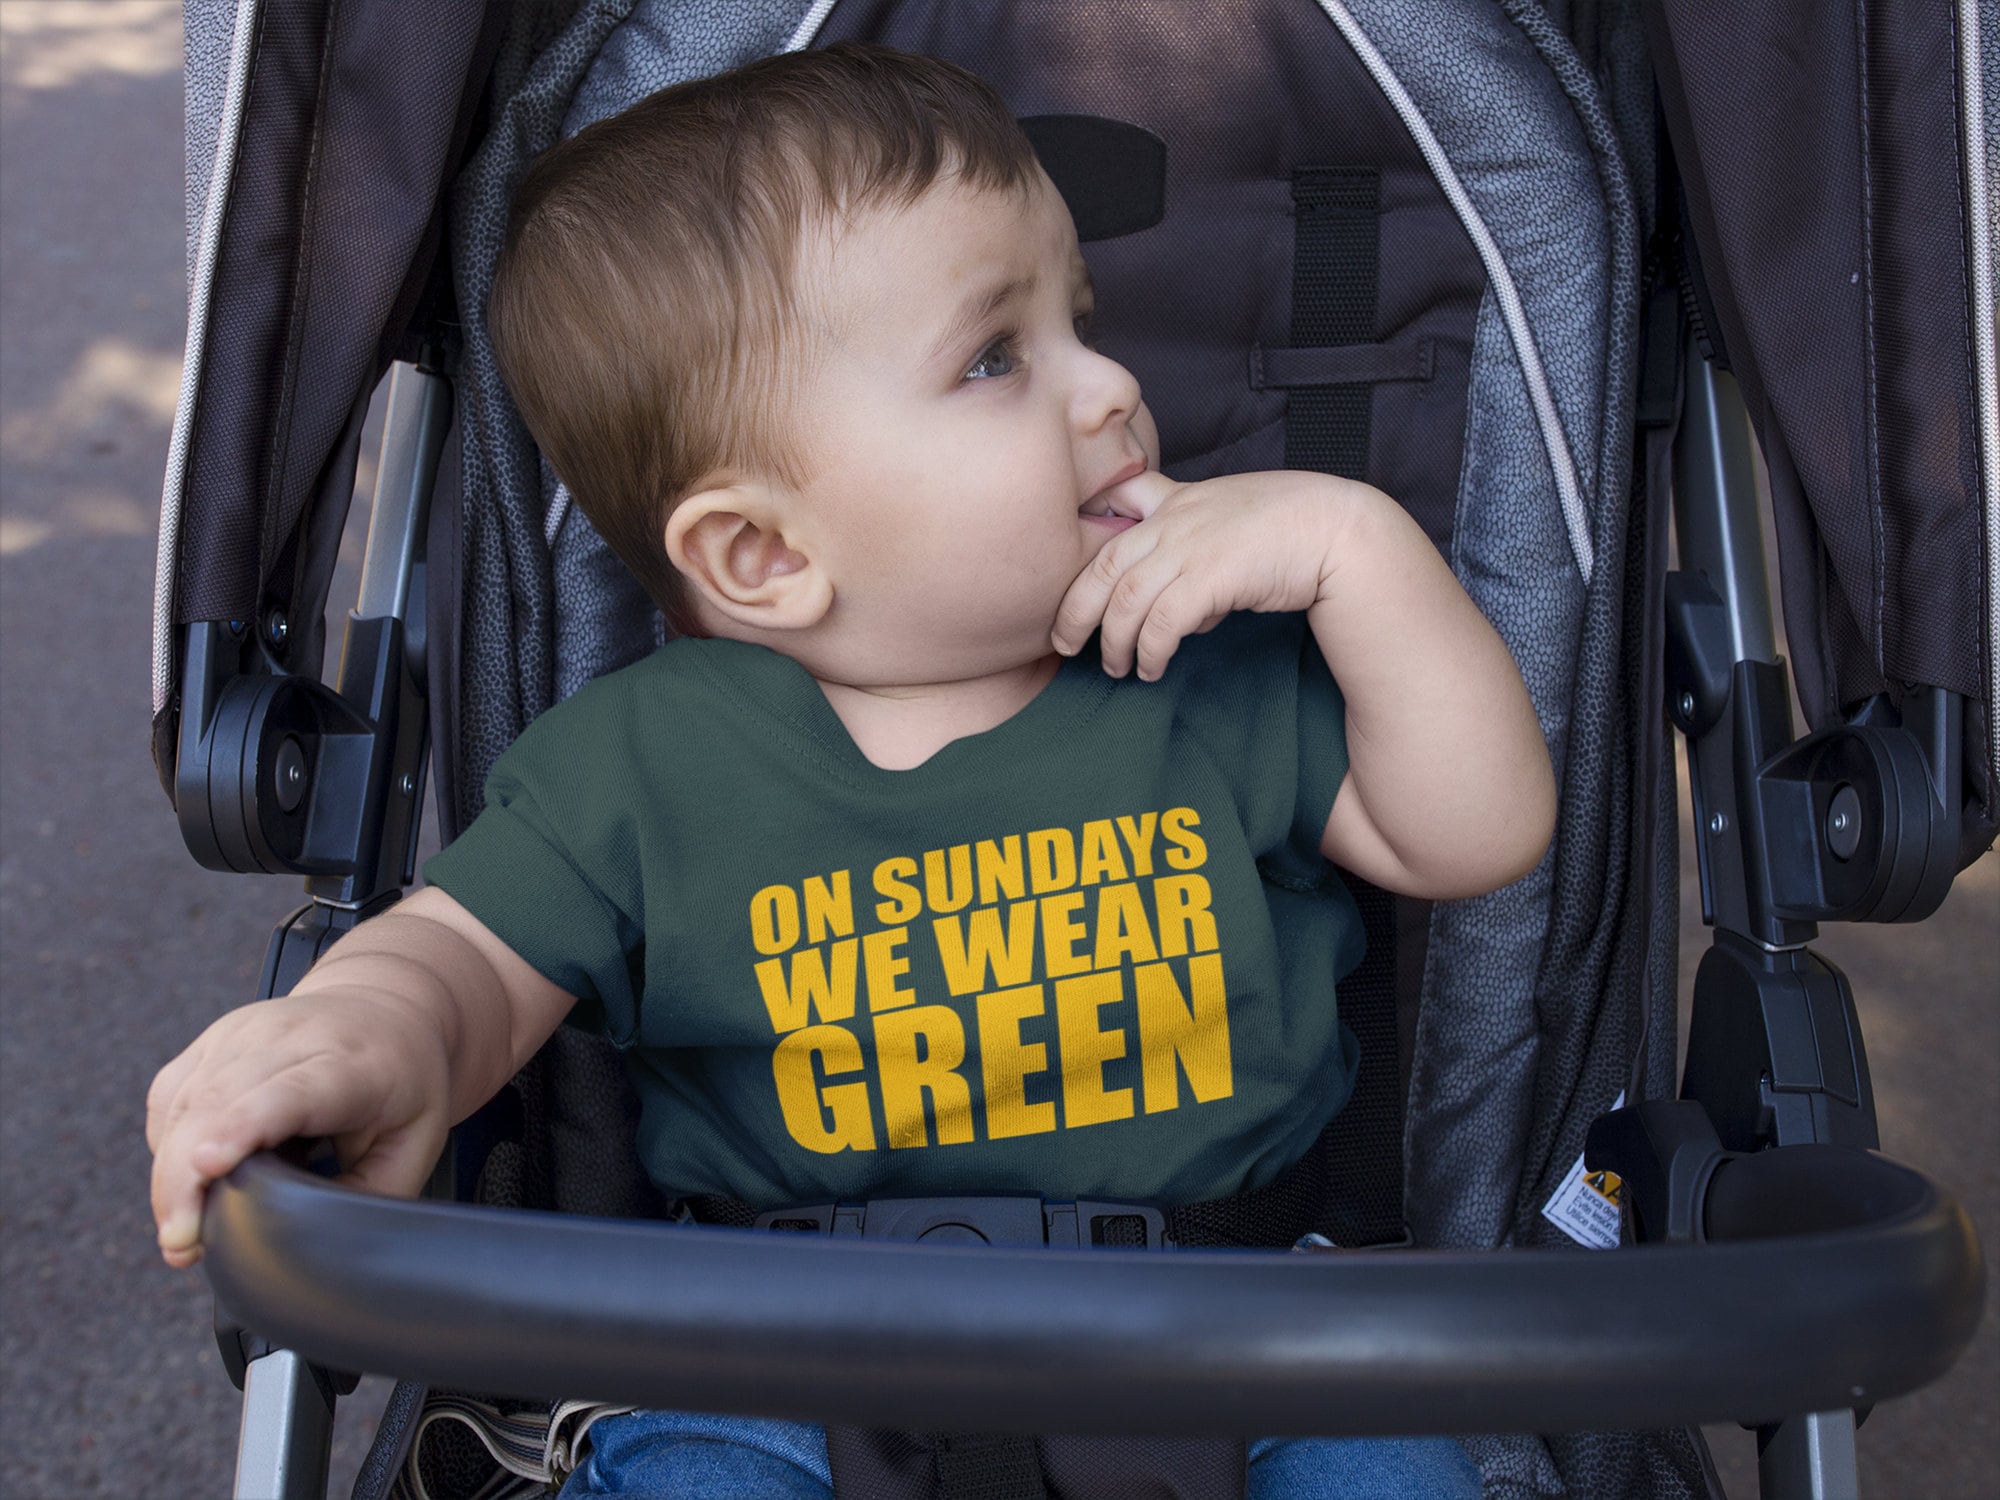 parrilla fluido gesto Adorable Green Bay Baby Bodysuit Makes the Diaper Bag Packers - Etsy